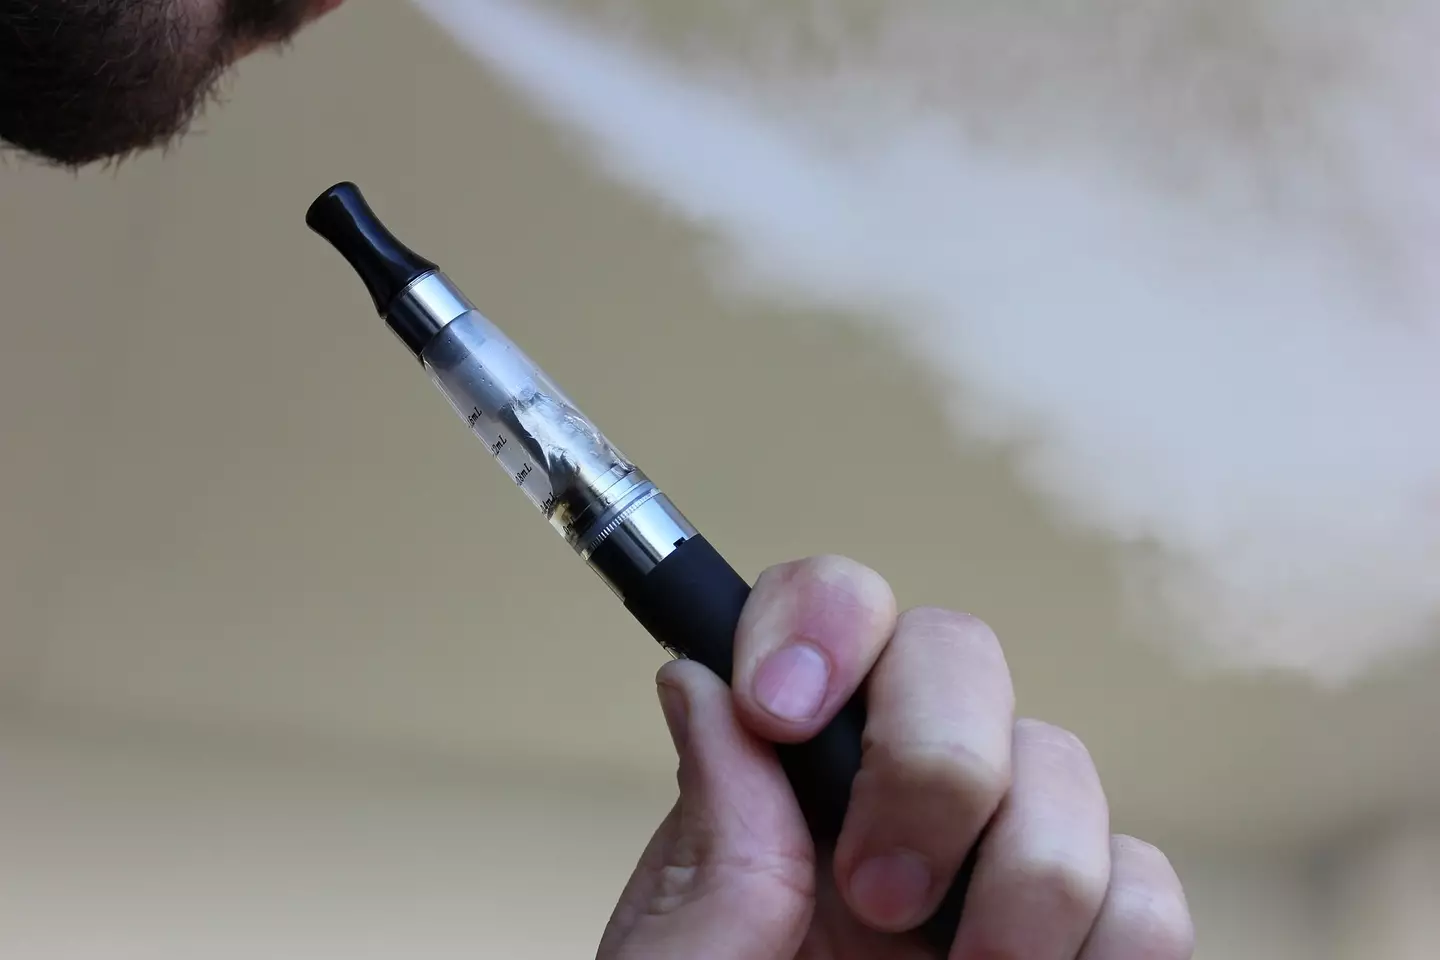 The study compared the lungs of smokers to non-smokers and vape users.